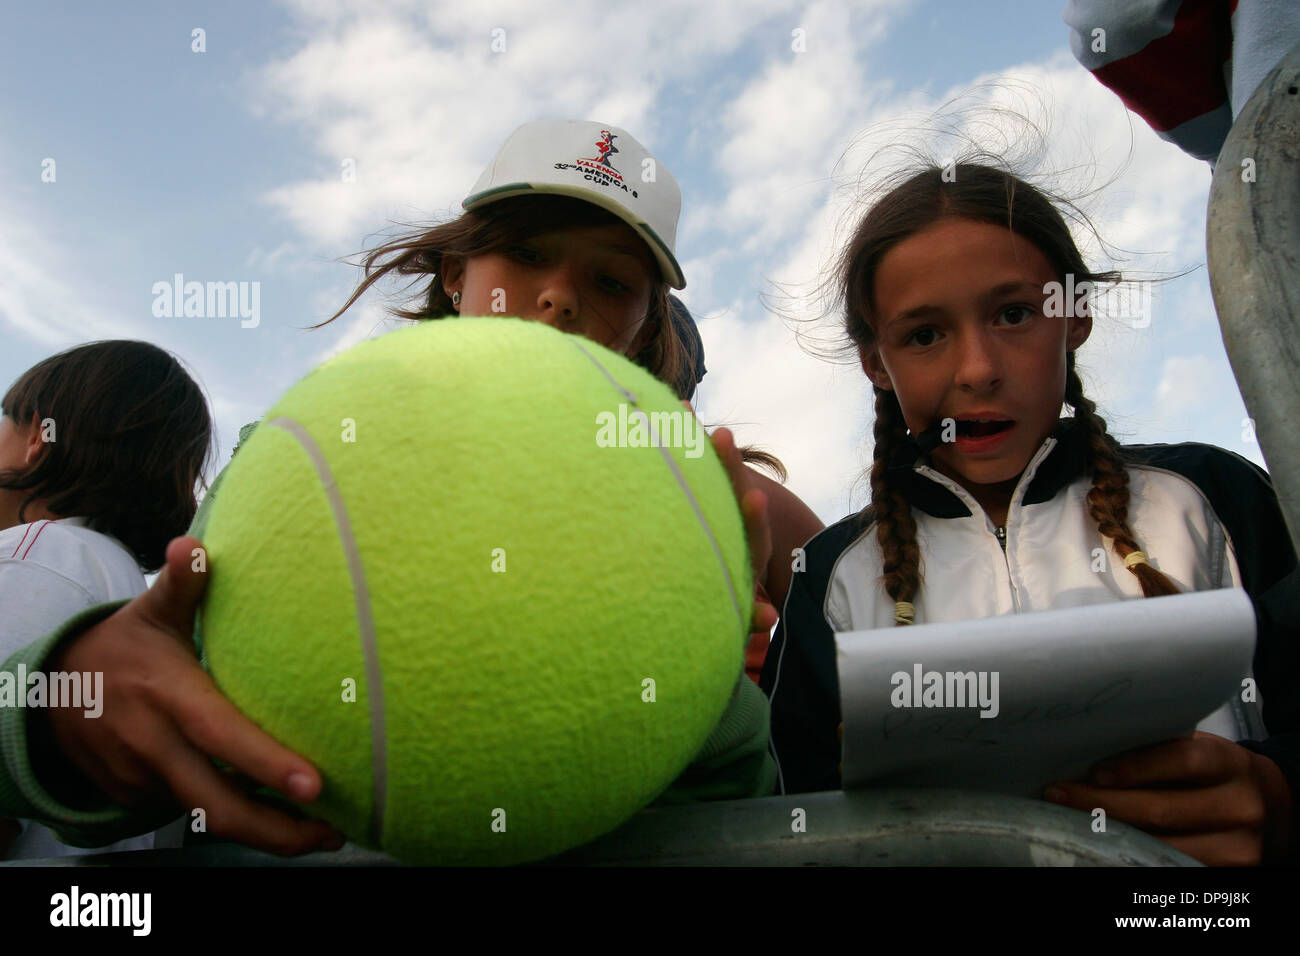 Spain´s tennis player Rafa Nadal fans seen during a match in the island of Majorca, Spain. Stock Photo